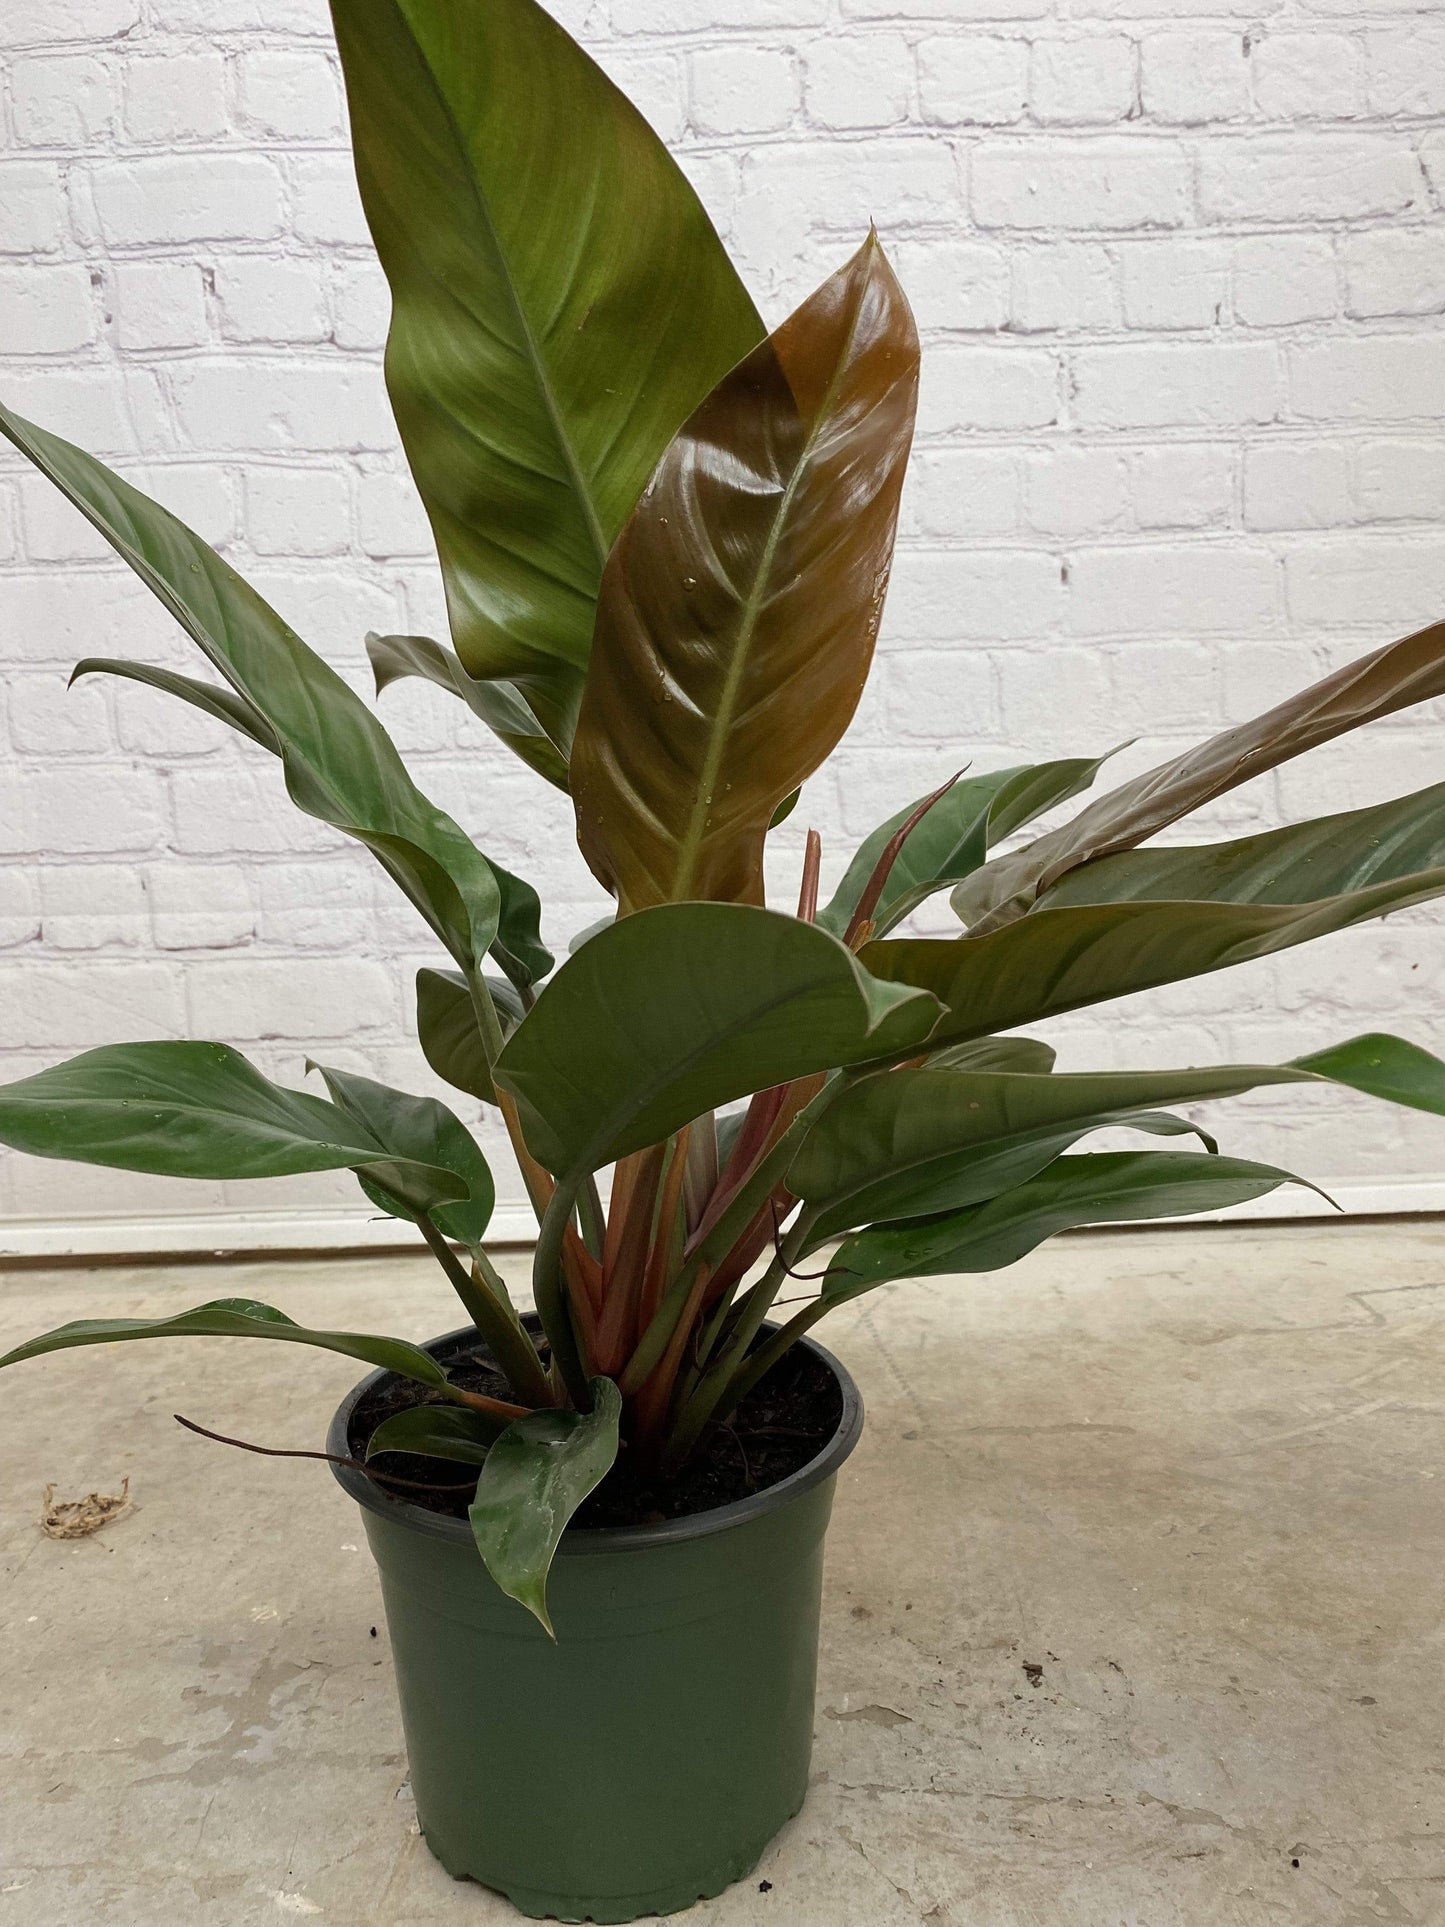 Plant Goals Plant Shop 8" Philodendron Imperial Red